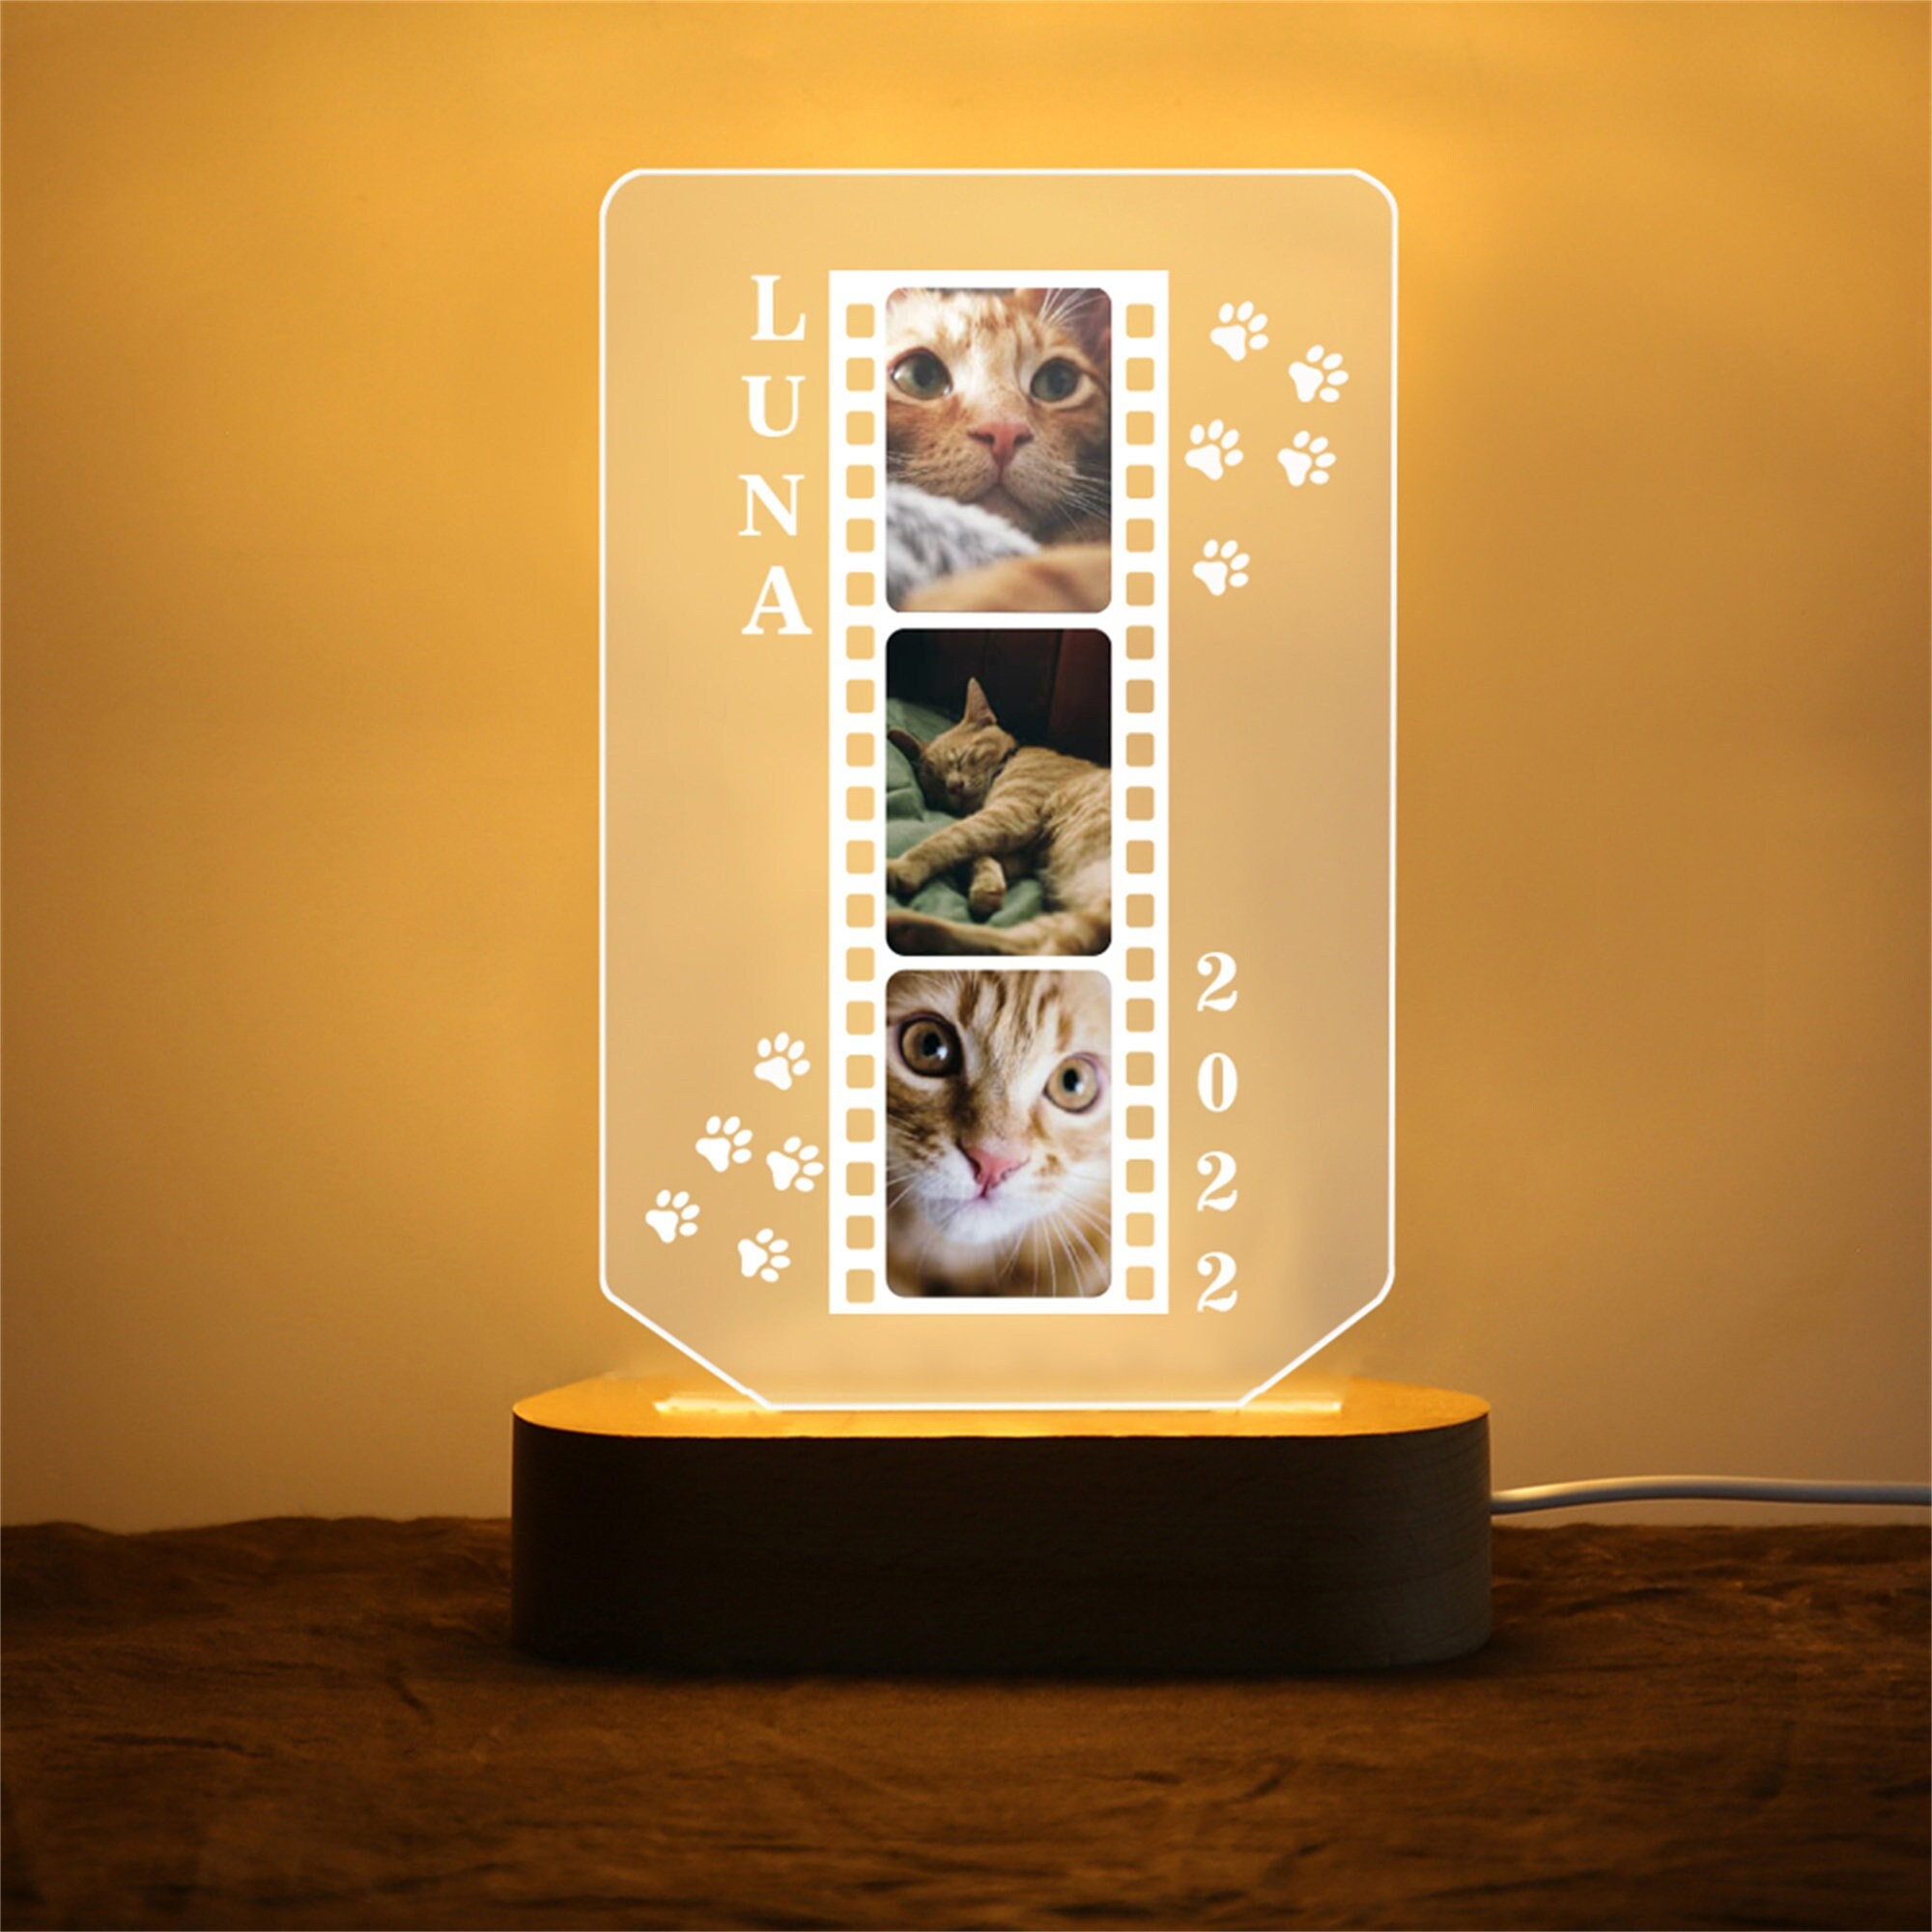 Paint Your Own Cat Lamp Art Kit, Large Upgraded DIY Geometric Cat Lamp, Gifts C